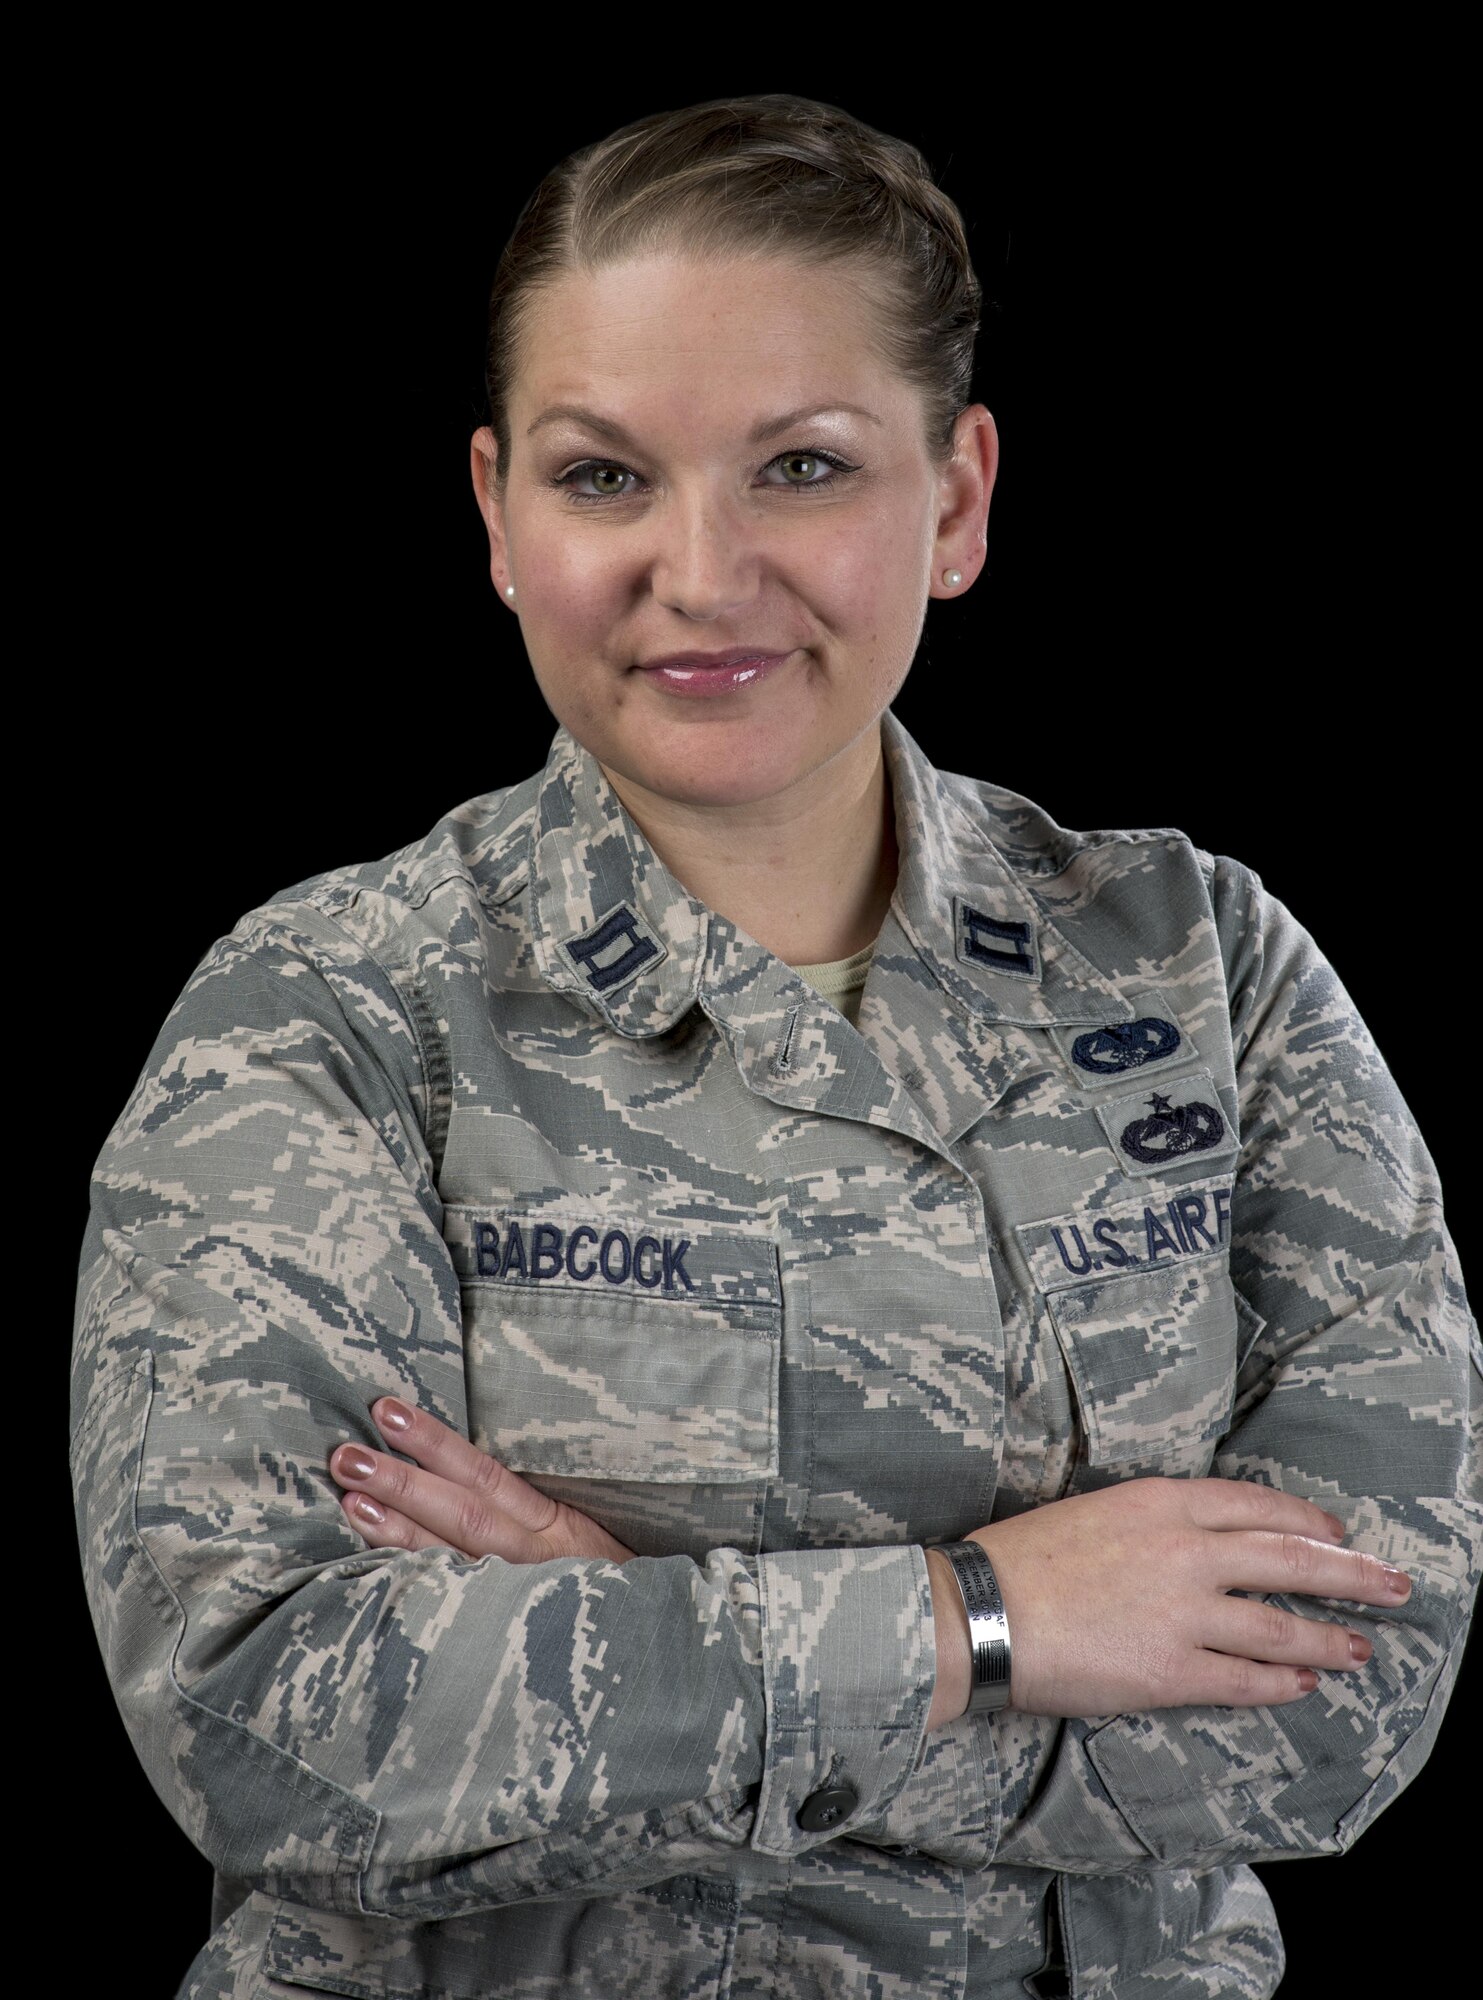 Capt. Leanne Babcock, 349th Logistics Readiness Squadron, operations officer, displays the tokens that she always keeps near, July 27, 2017 Travis Air Force Base, Calif. Men and women serving their country in all branches of the military have traditionally kept meaningful mementos or talismans close to them for good luck, as reminders, to bring comfort or other deeply felt personal reasons. (U.S. Air Force photo/ Heide Couch)